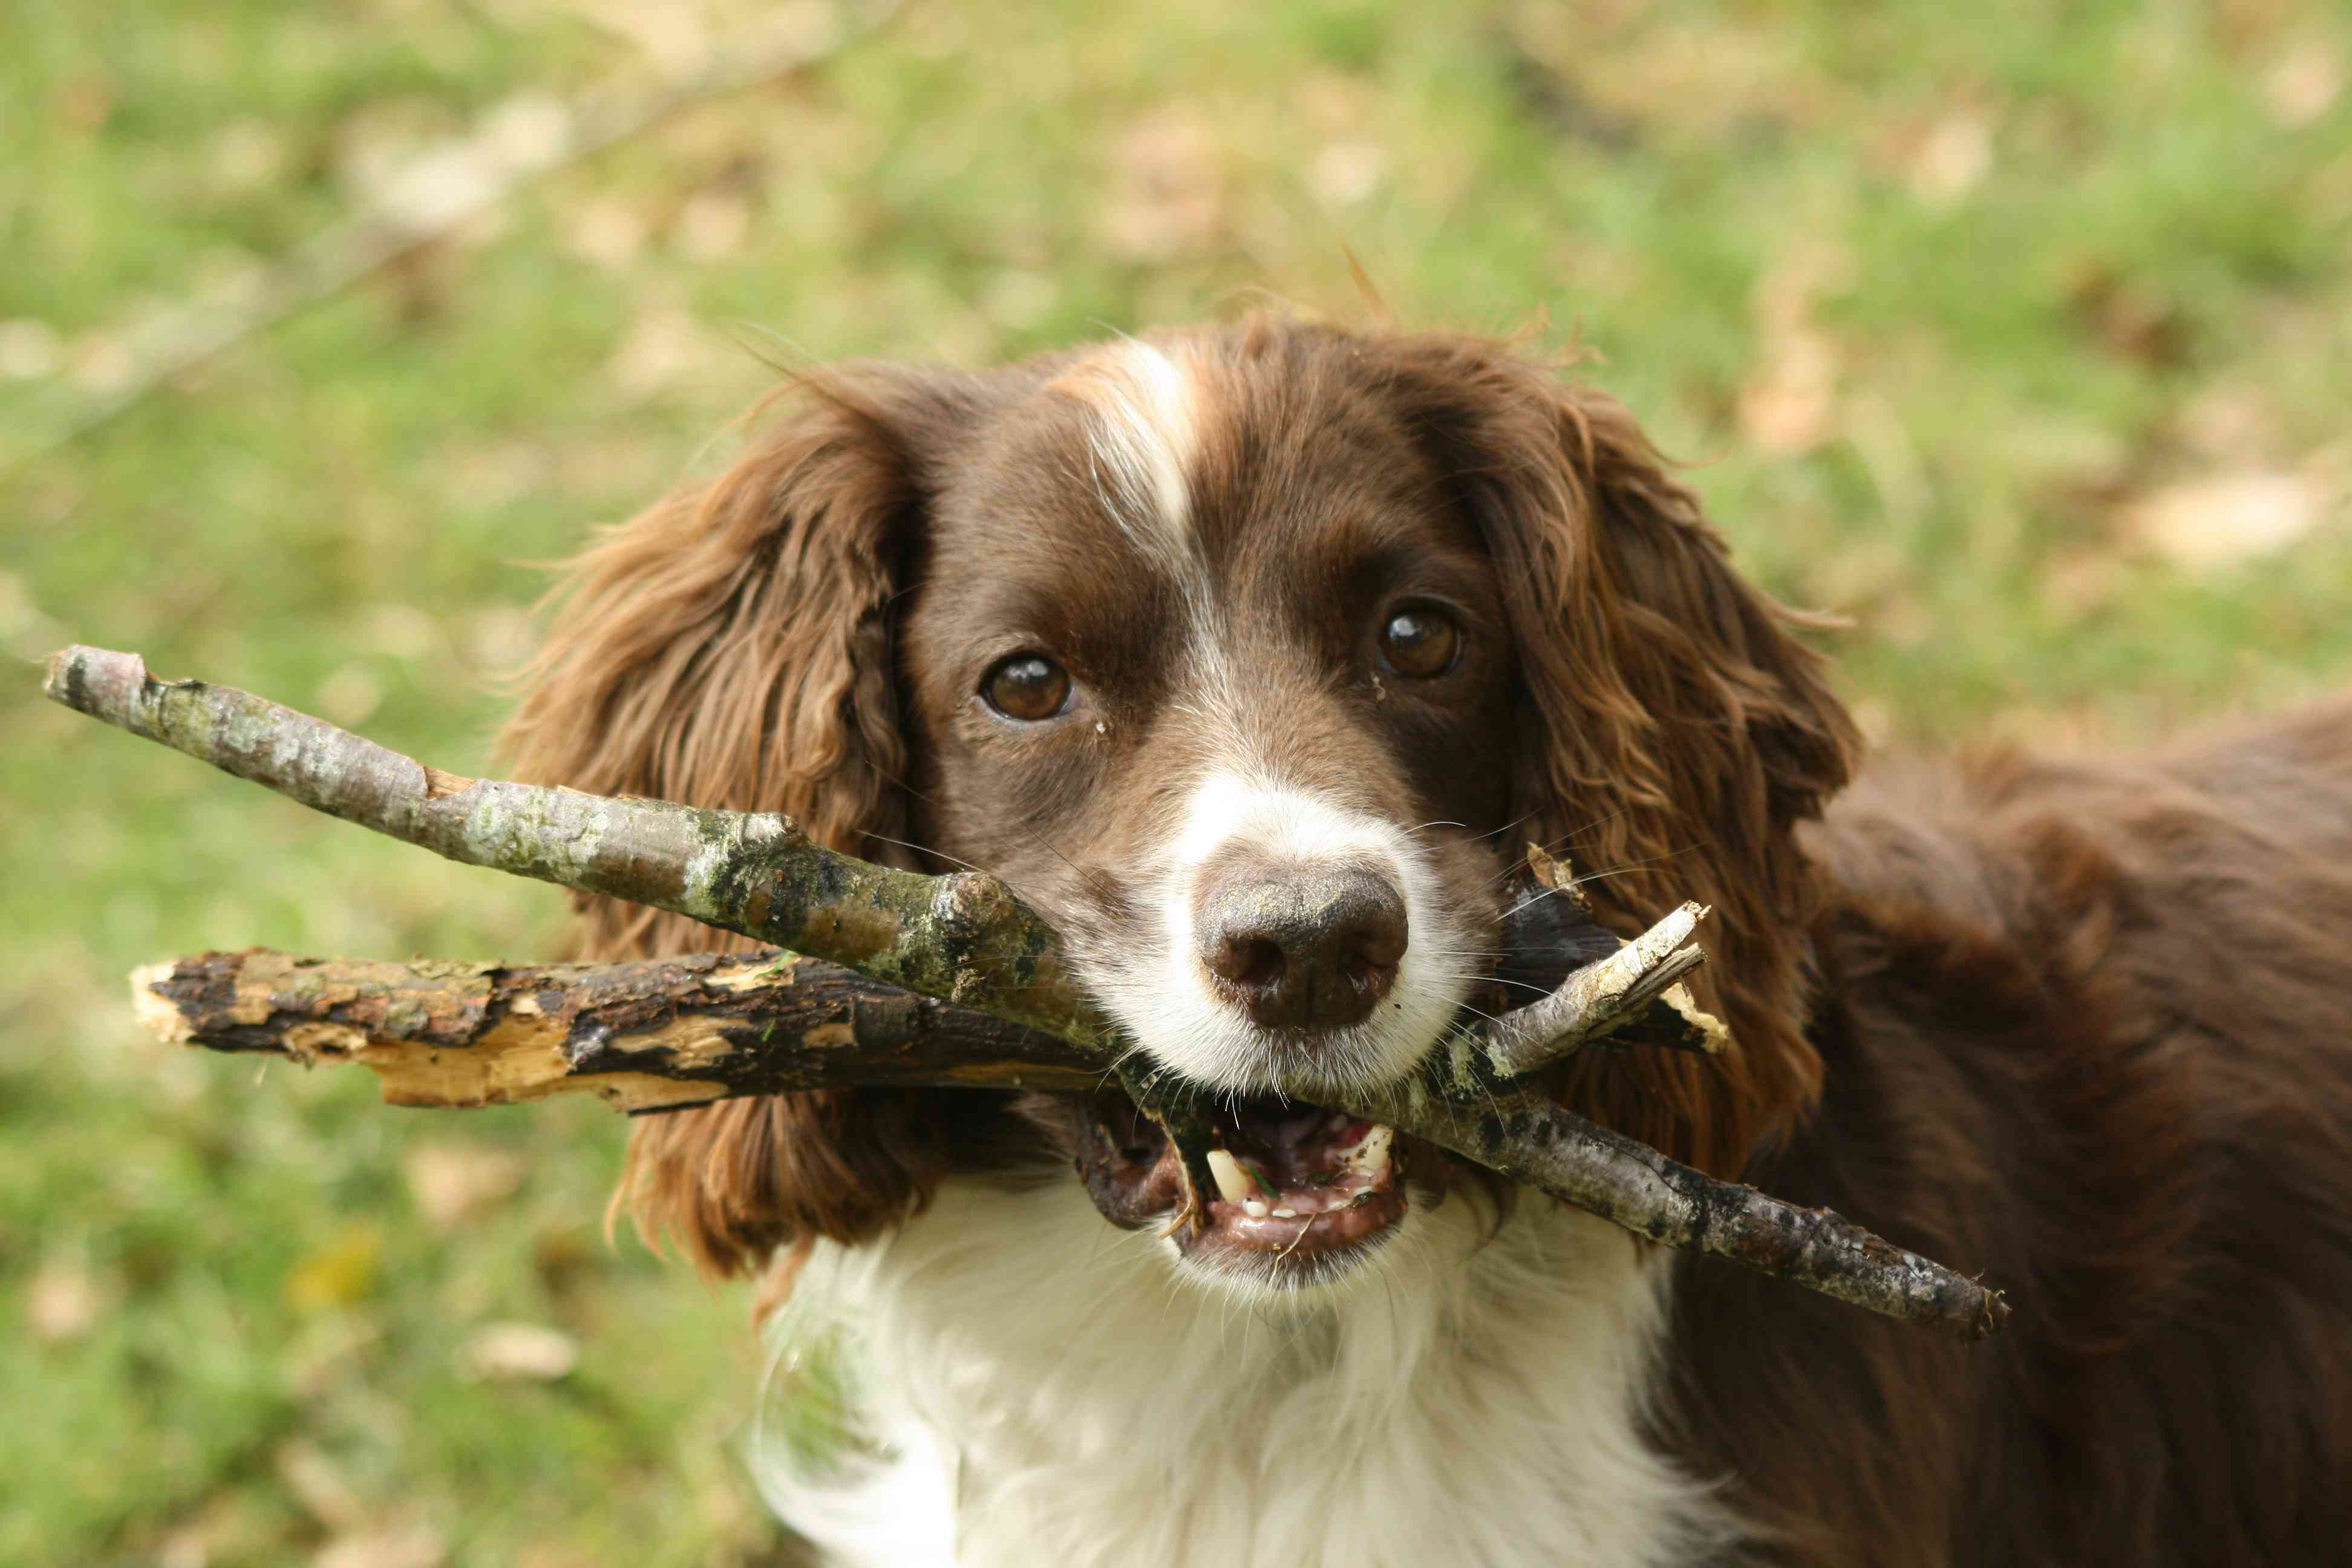 Dog carrying branches in mouth